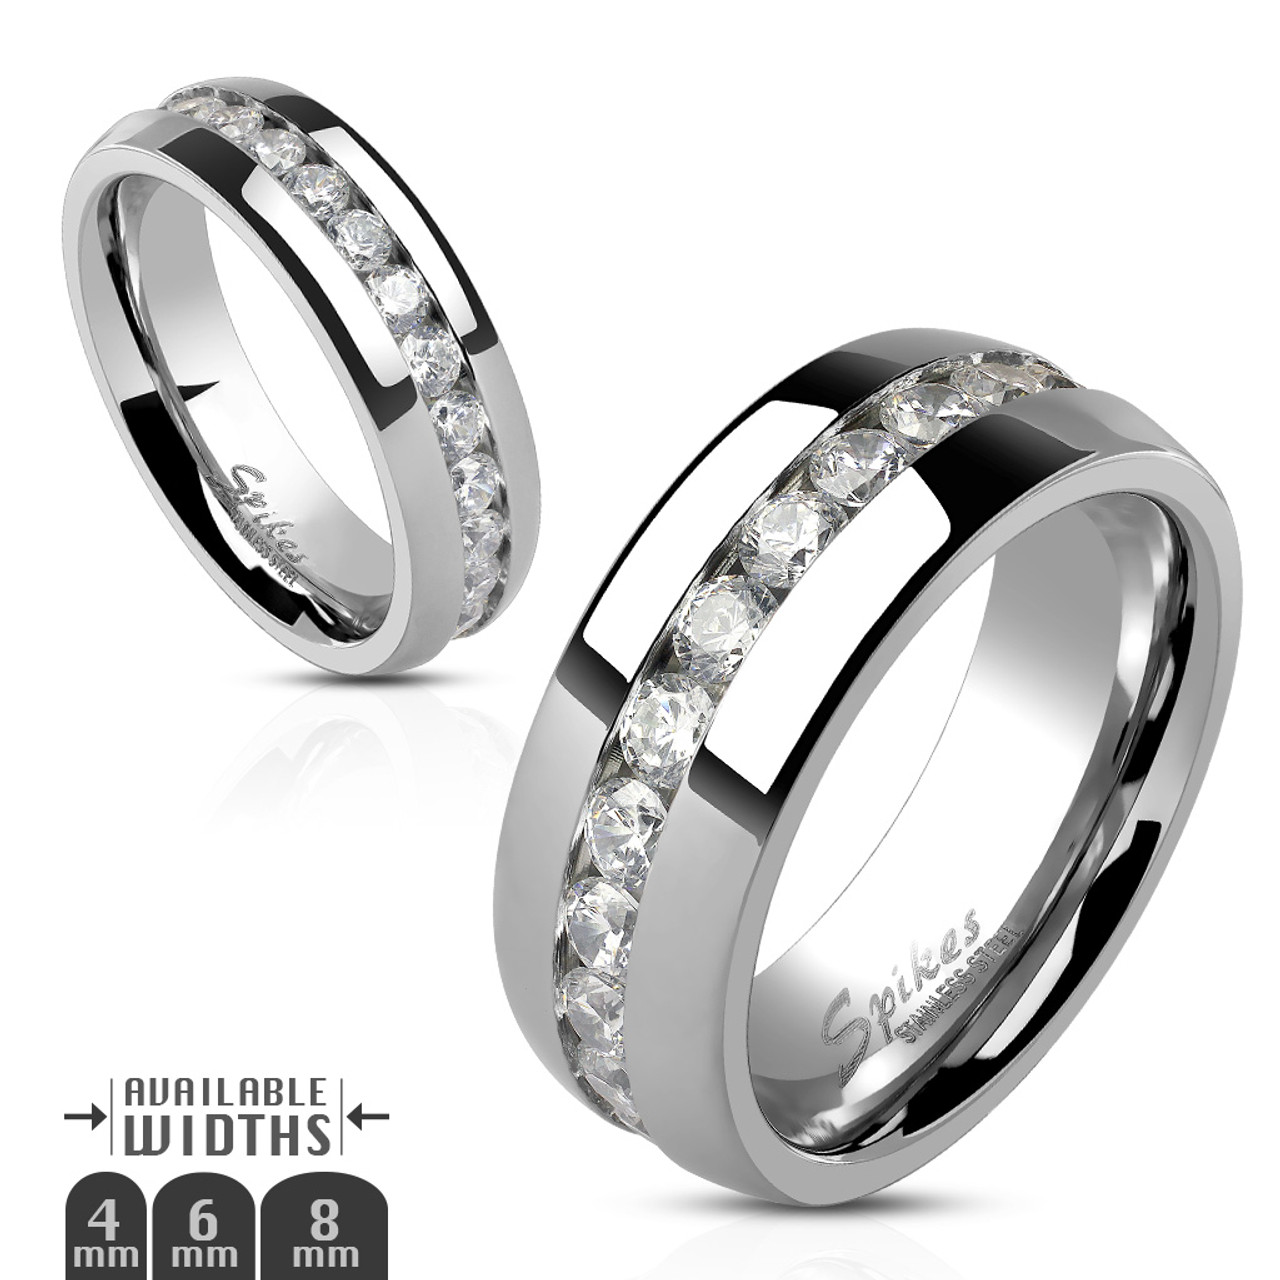 18ct White Gold Patterned Matching HIS and HERS Wedding Rings | Smooch Rings